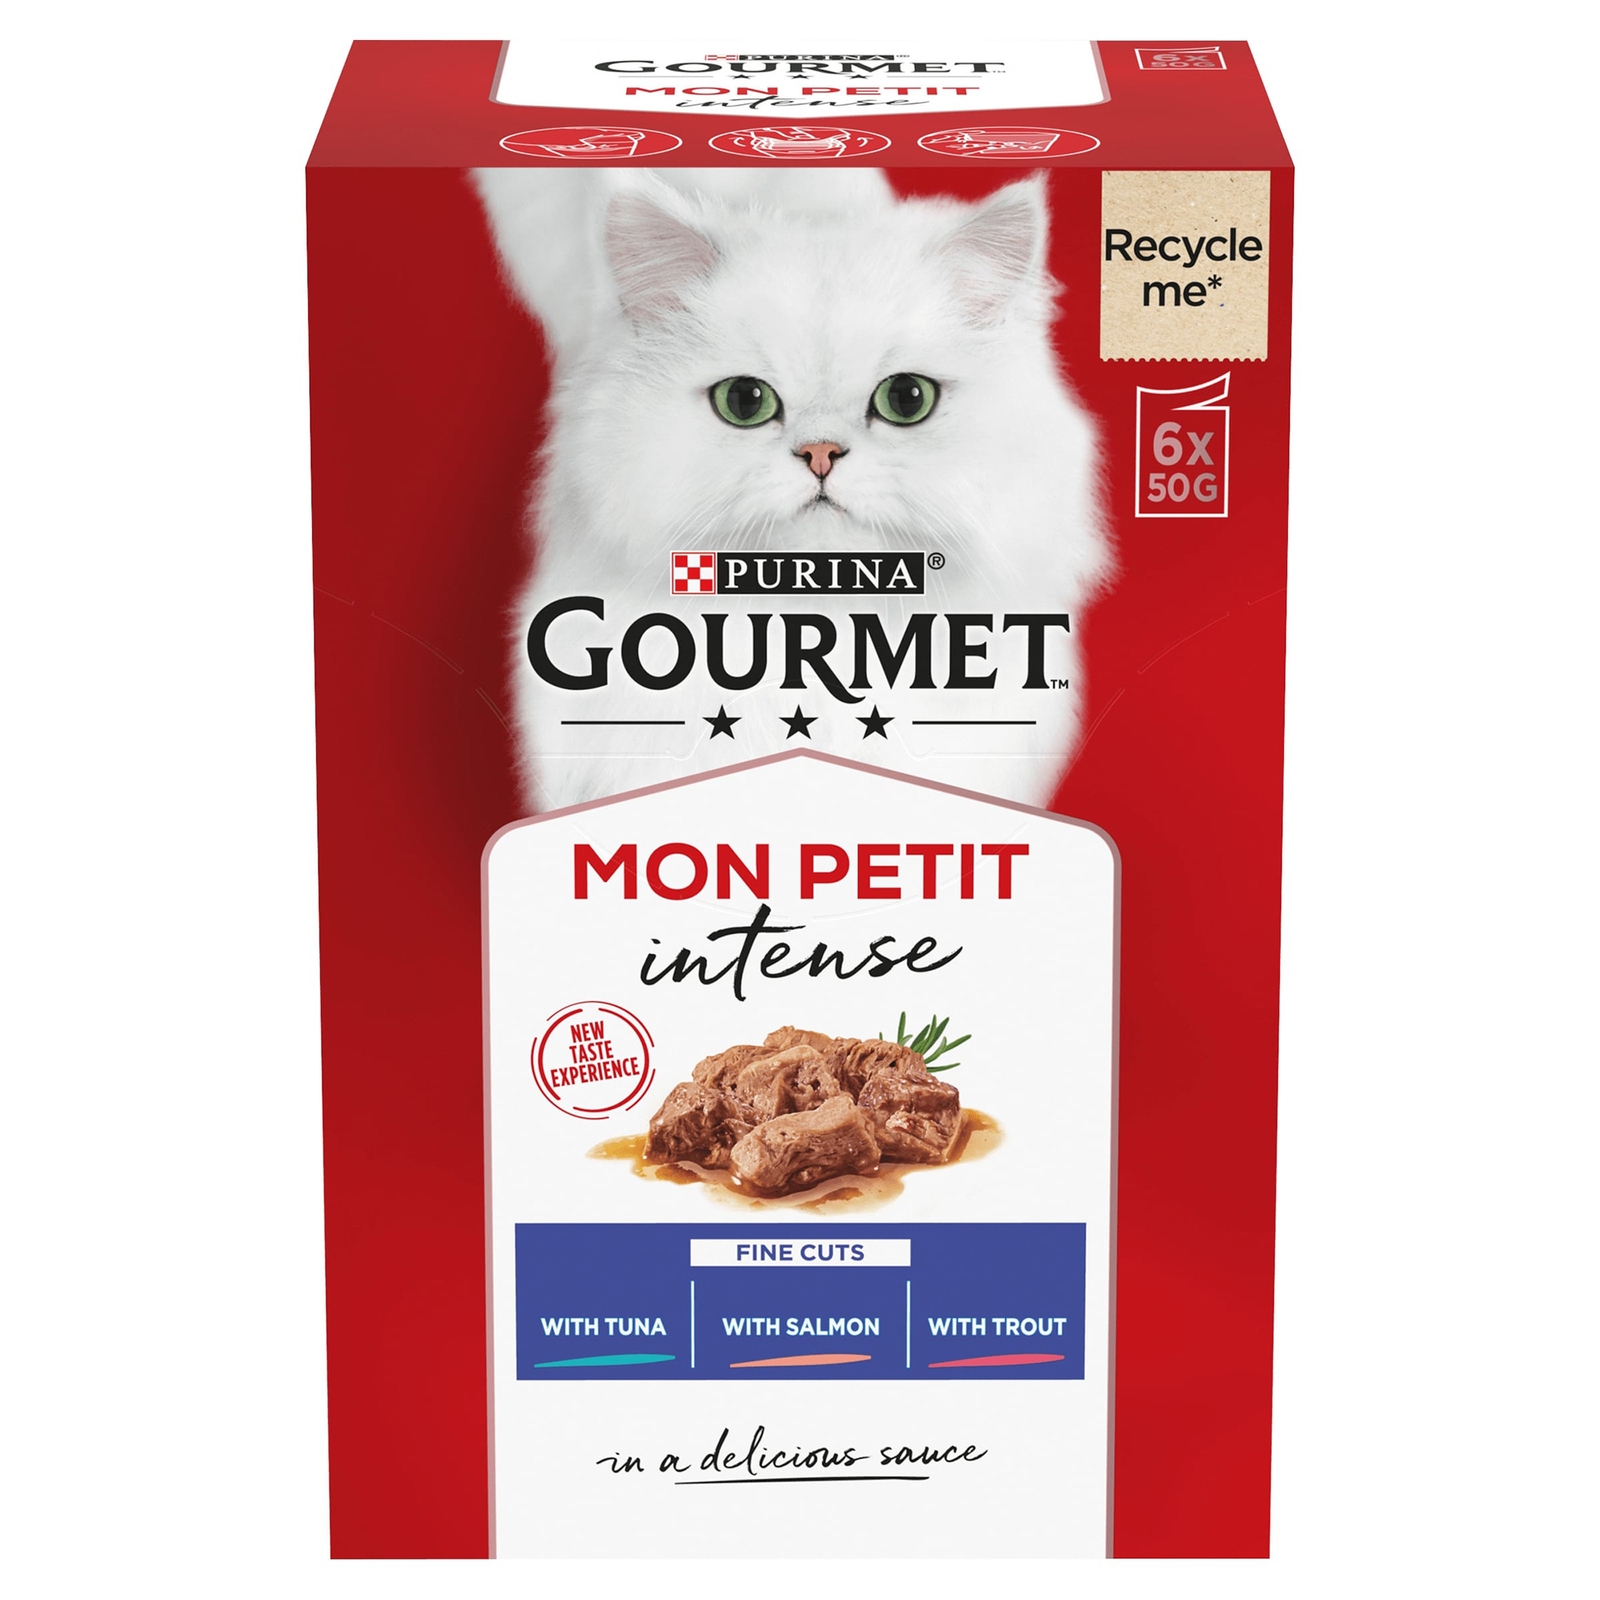 Image of Gourmet Mon Petit Fish Variety with Tuna, Salmon & Trout Adult Wet Cat Food 6x50g